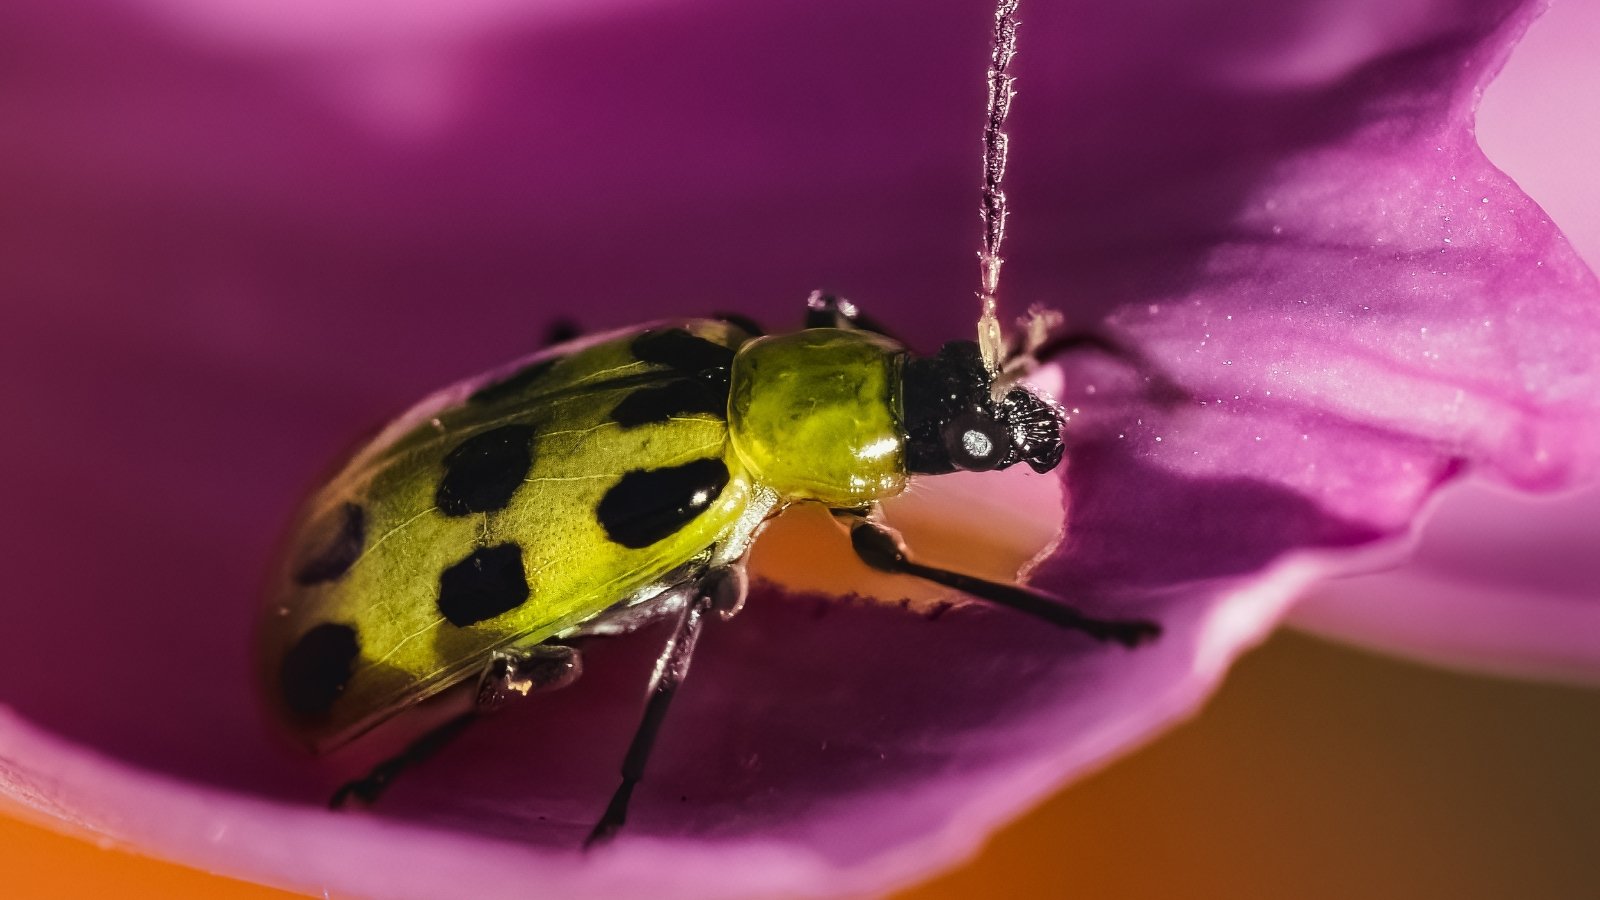 A close-up captures a yellow-green cucumber beetle with black spots, meticulously consuming the petals of a purple flower, showcasing its intricate details and natural colors.